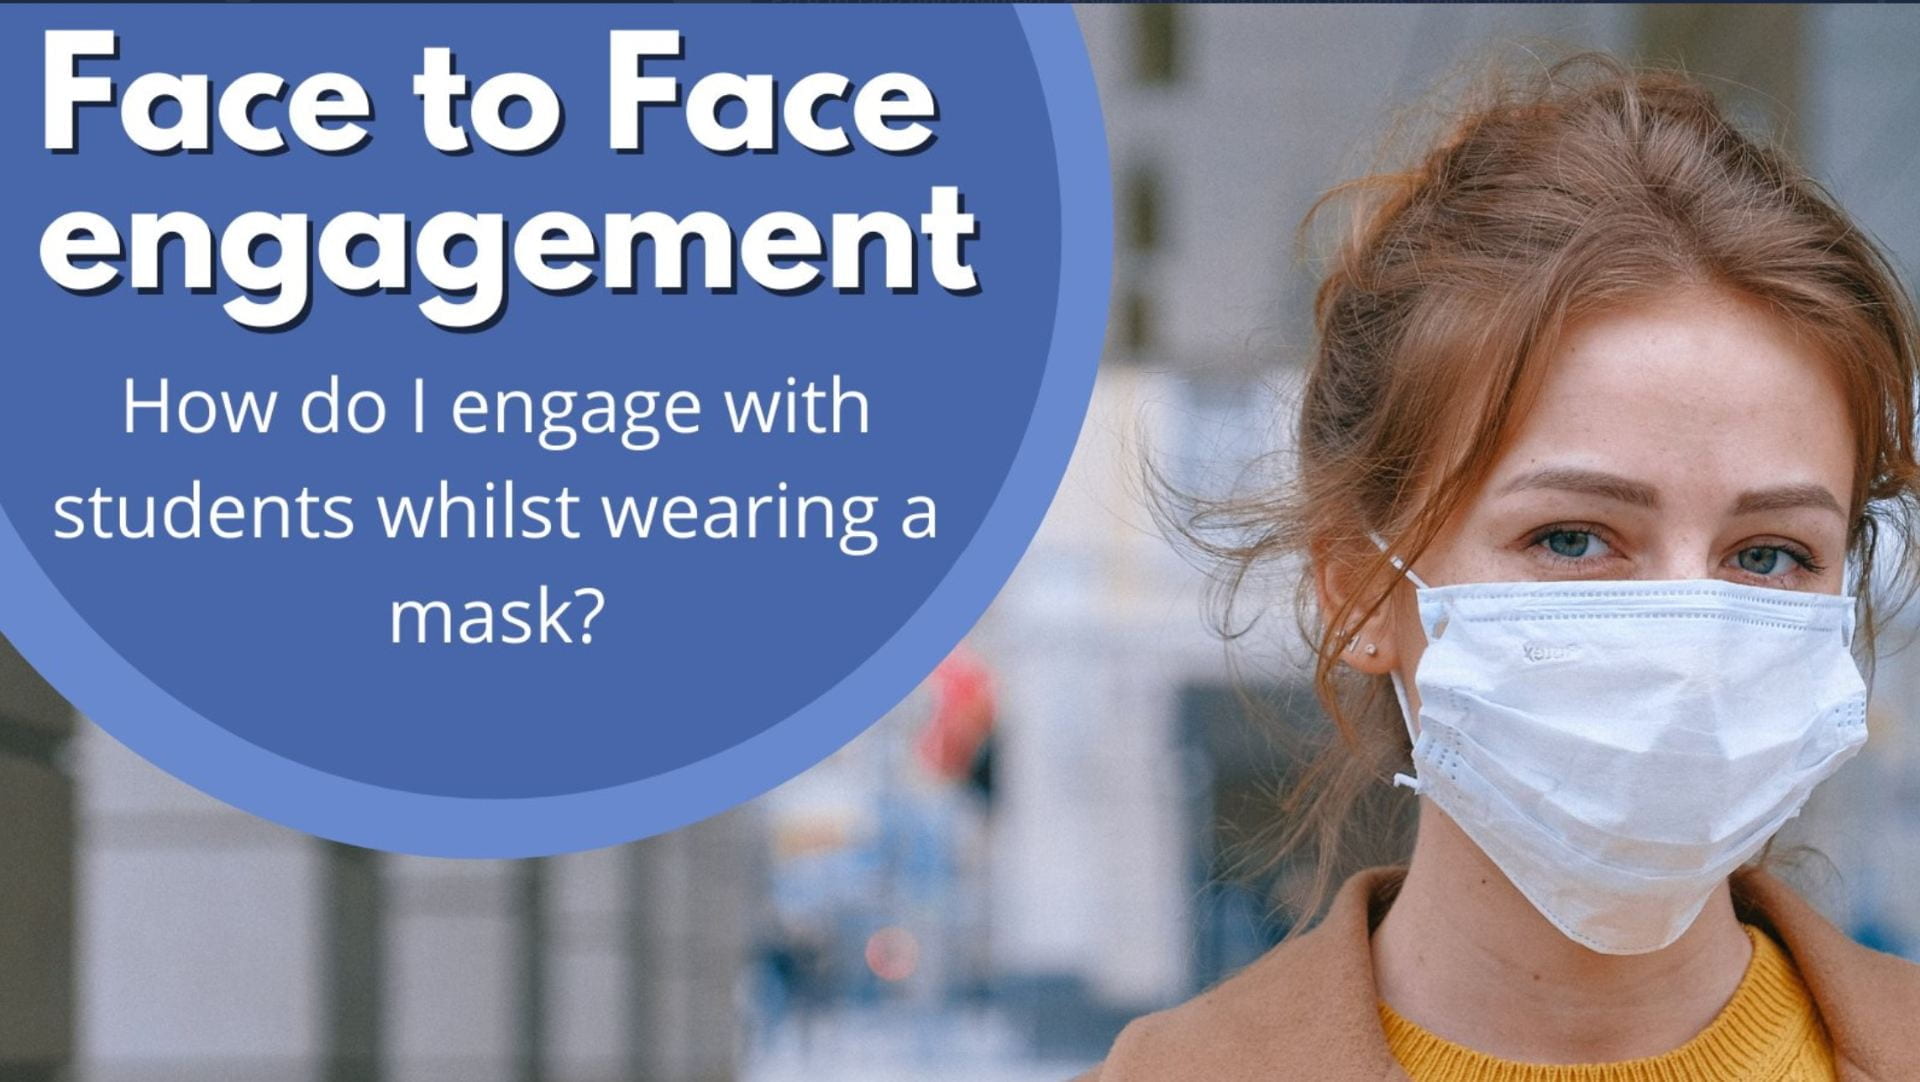 Face to face engagement. How do I engage students whilst wearing a mask?